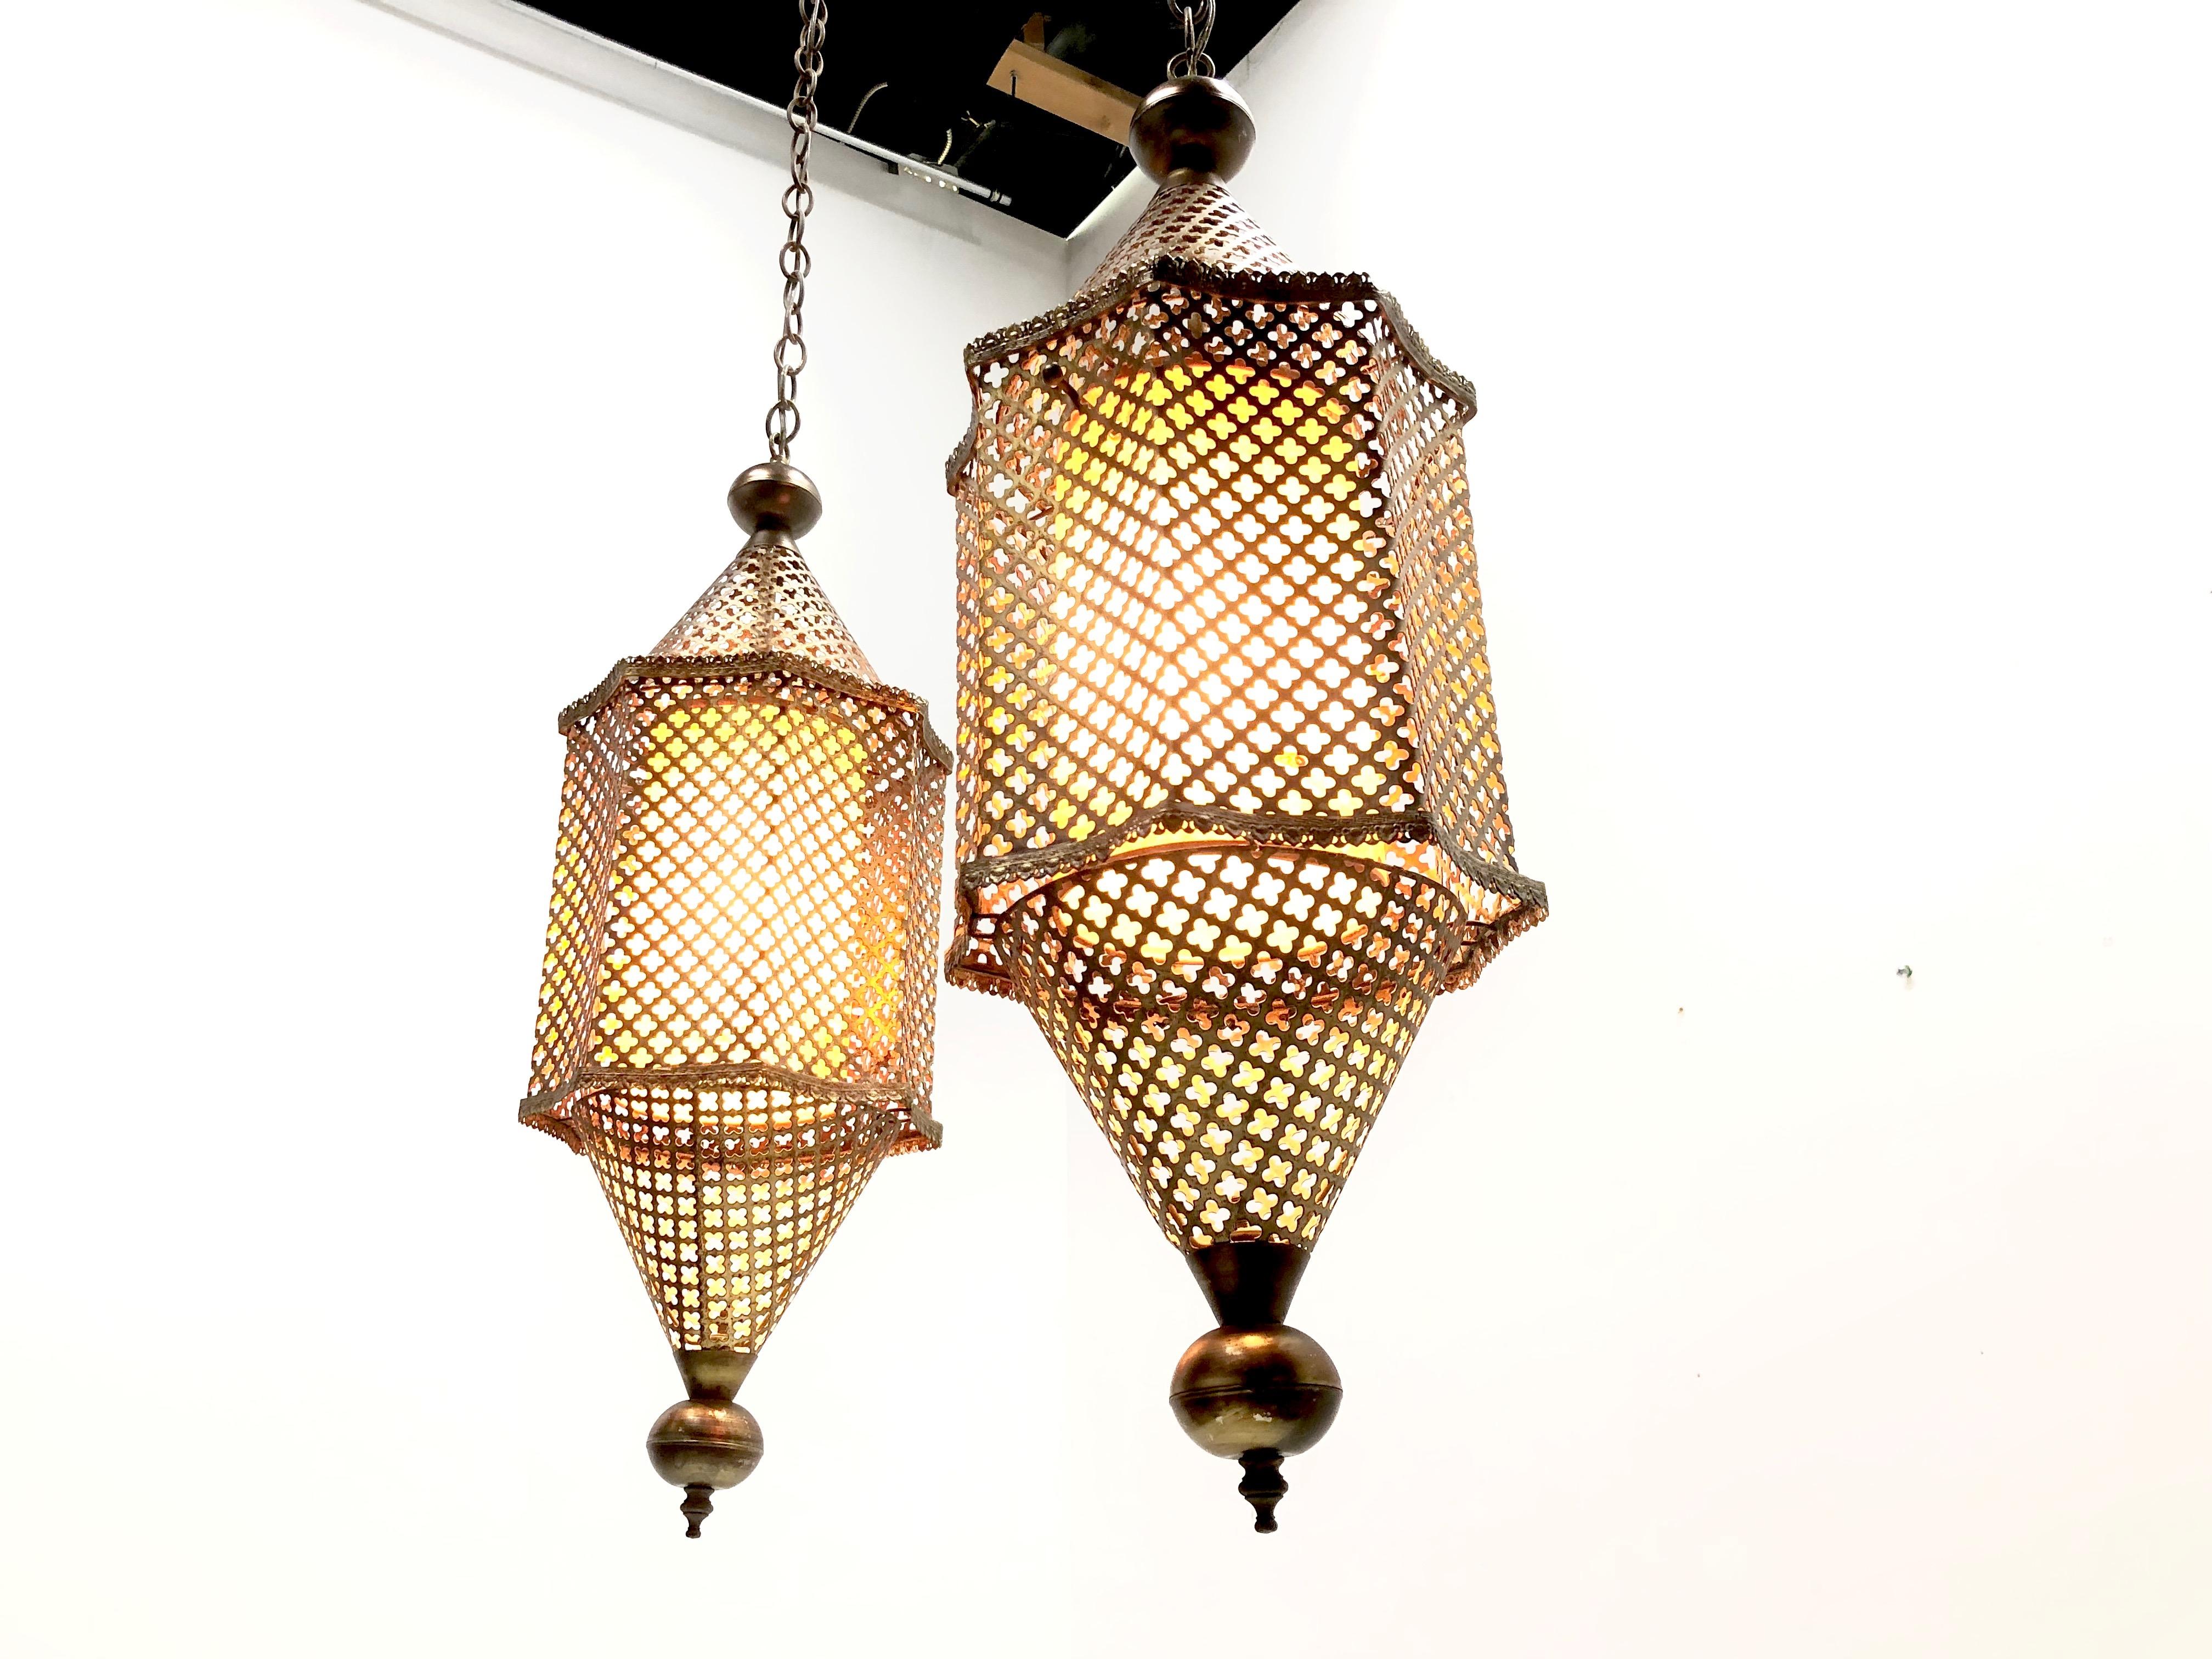 Pair of pierced brass Moroccan pendants. Pendants are in good vintage condition with oxidation on brass. One of the on/off switch is missing. Original wiring, circa 1960s.

Dimensions:
10